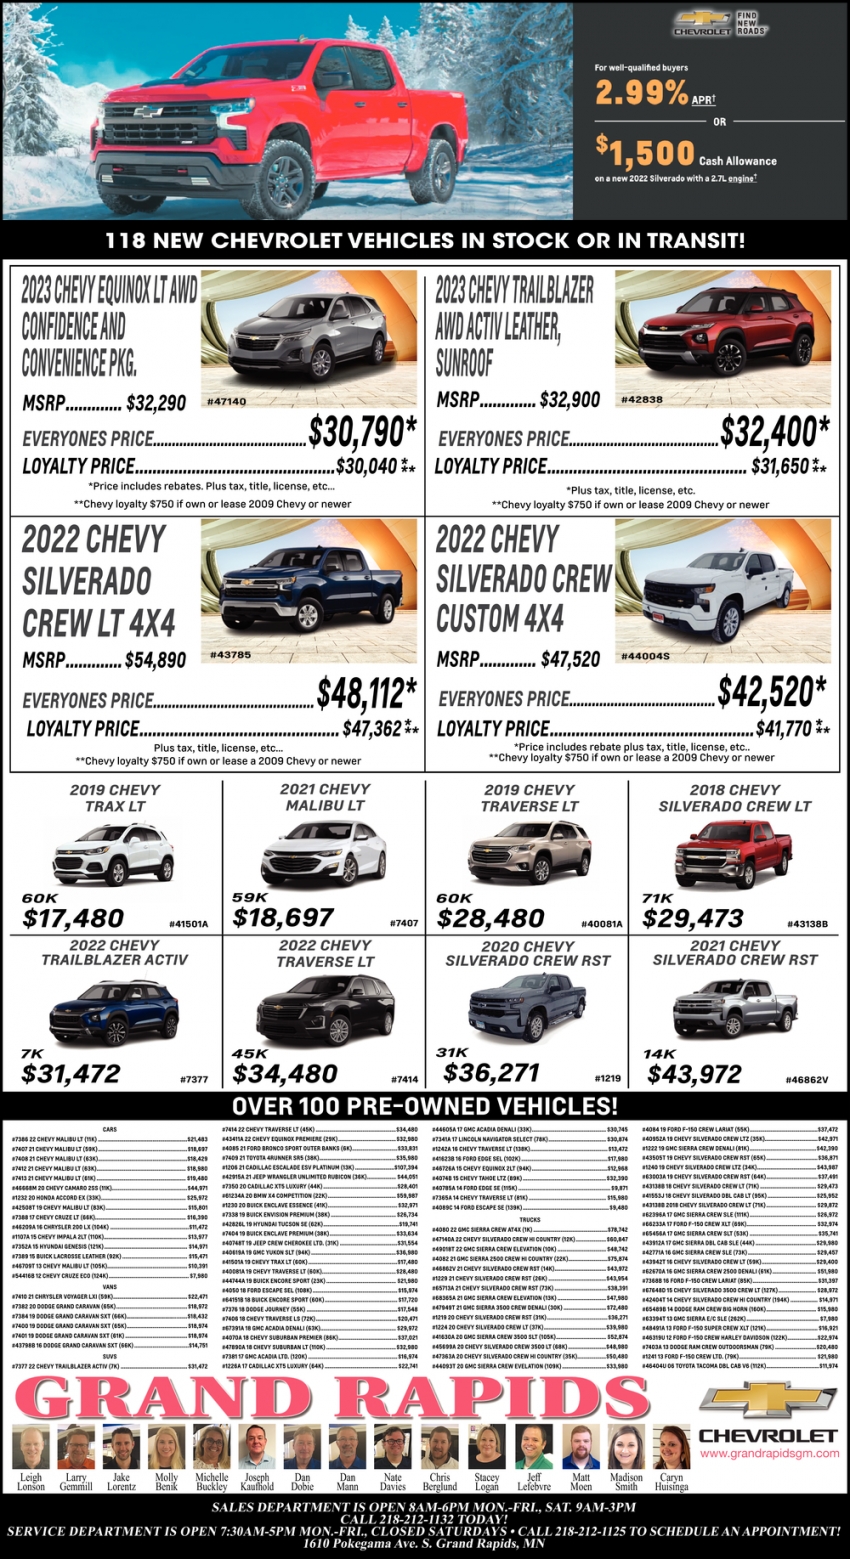 Over 100 Pre-Owned Vehicles!